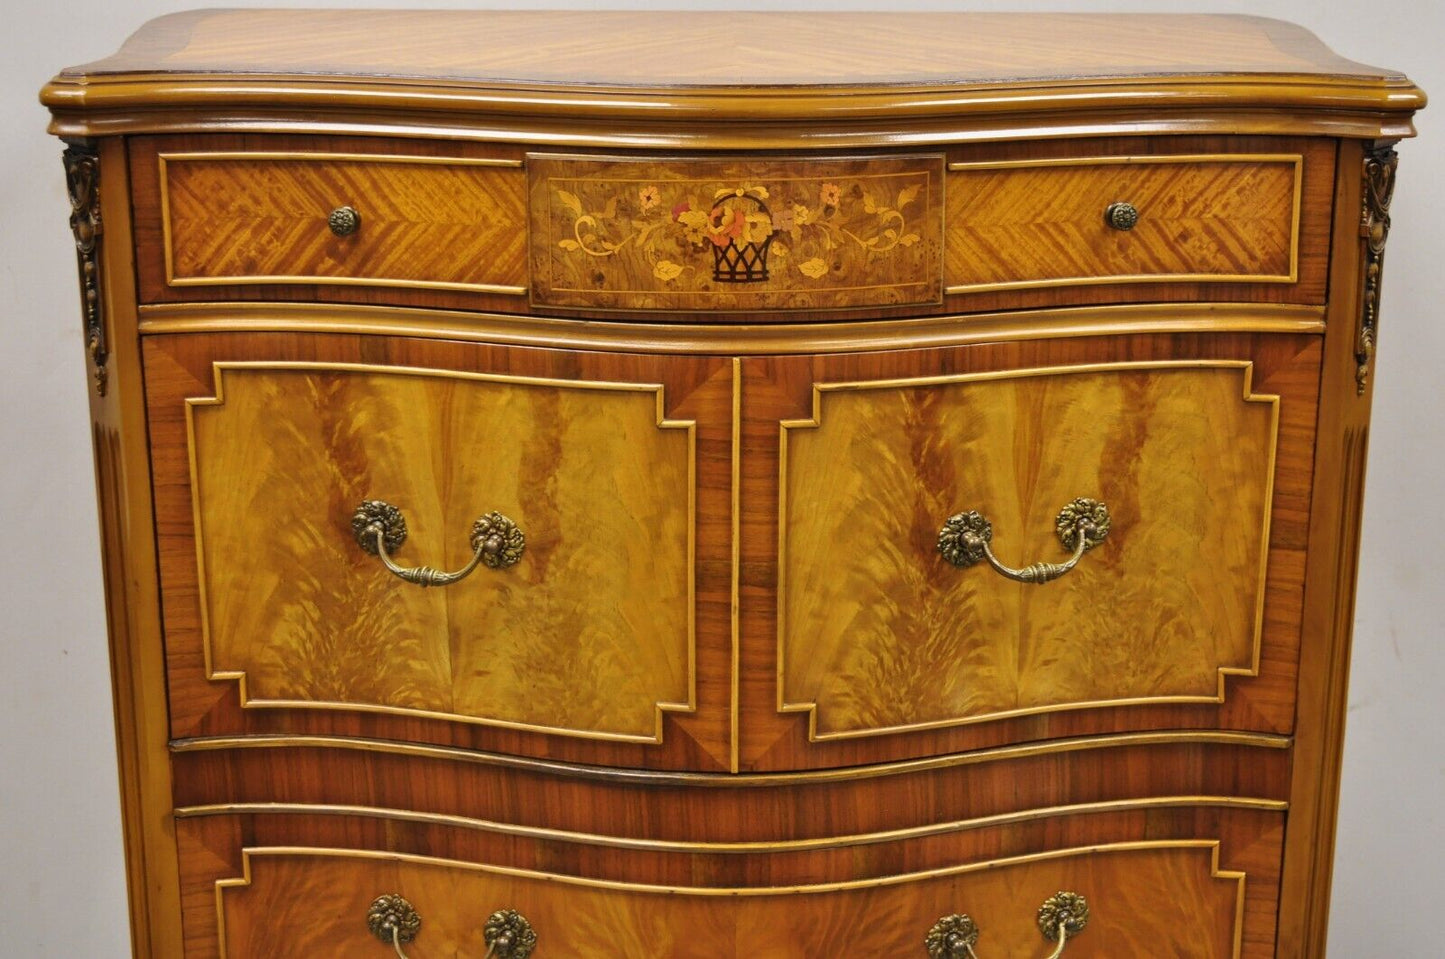 French Louis XV Style Satinwood Serpentine Highboy Tall Chest Dresser by Joerns